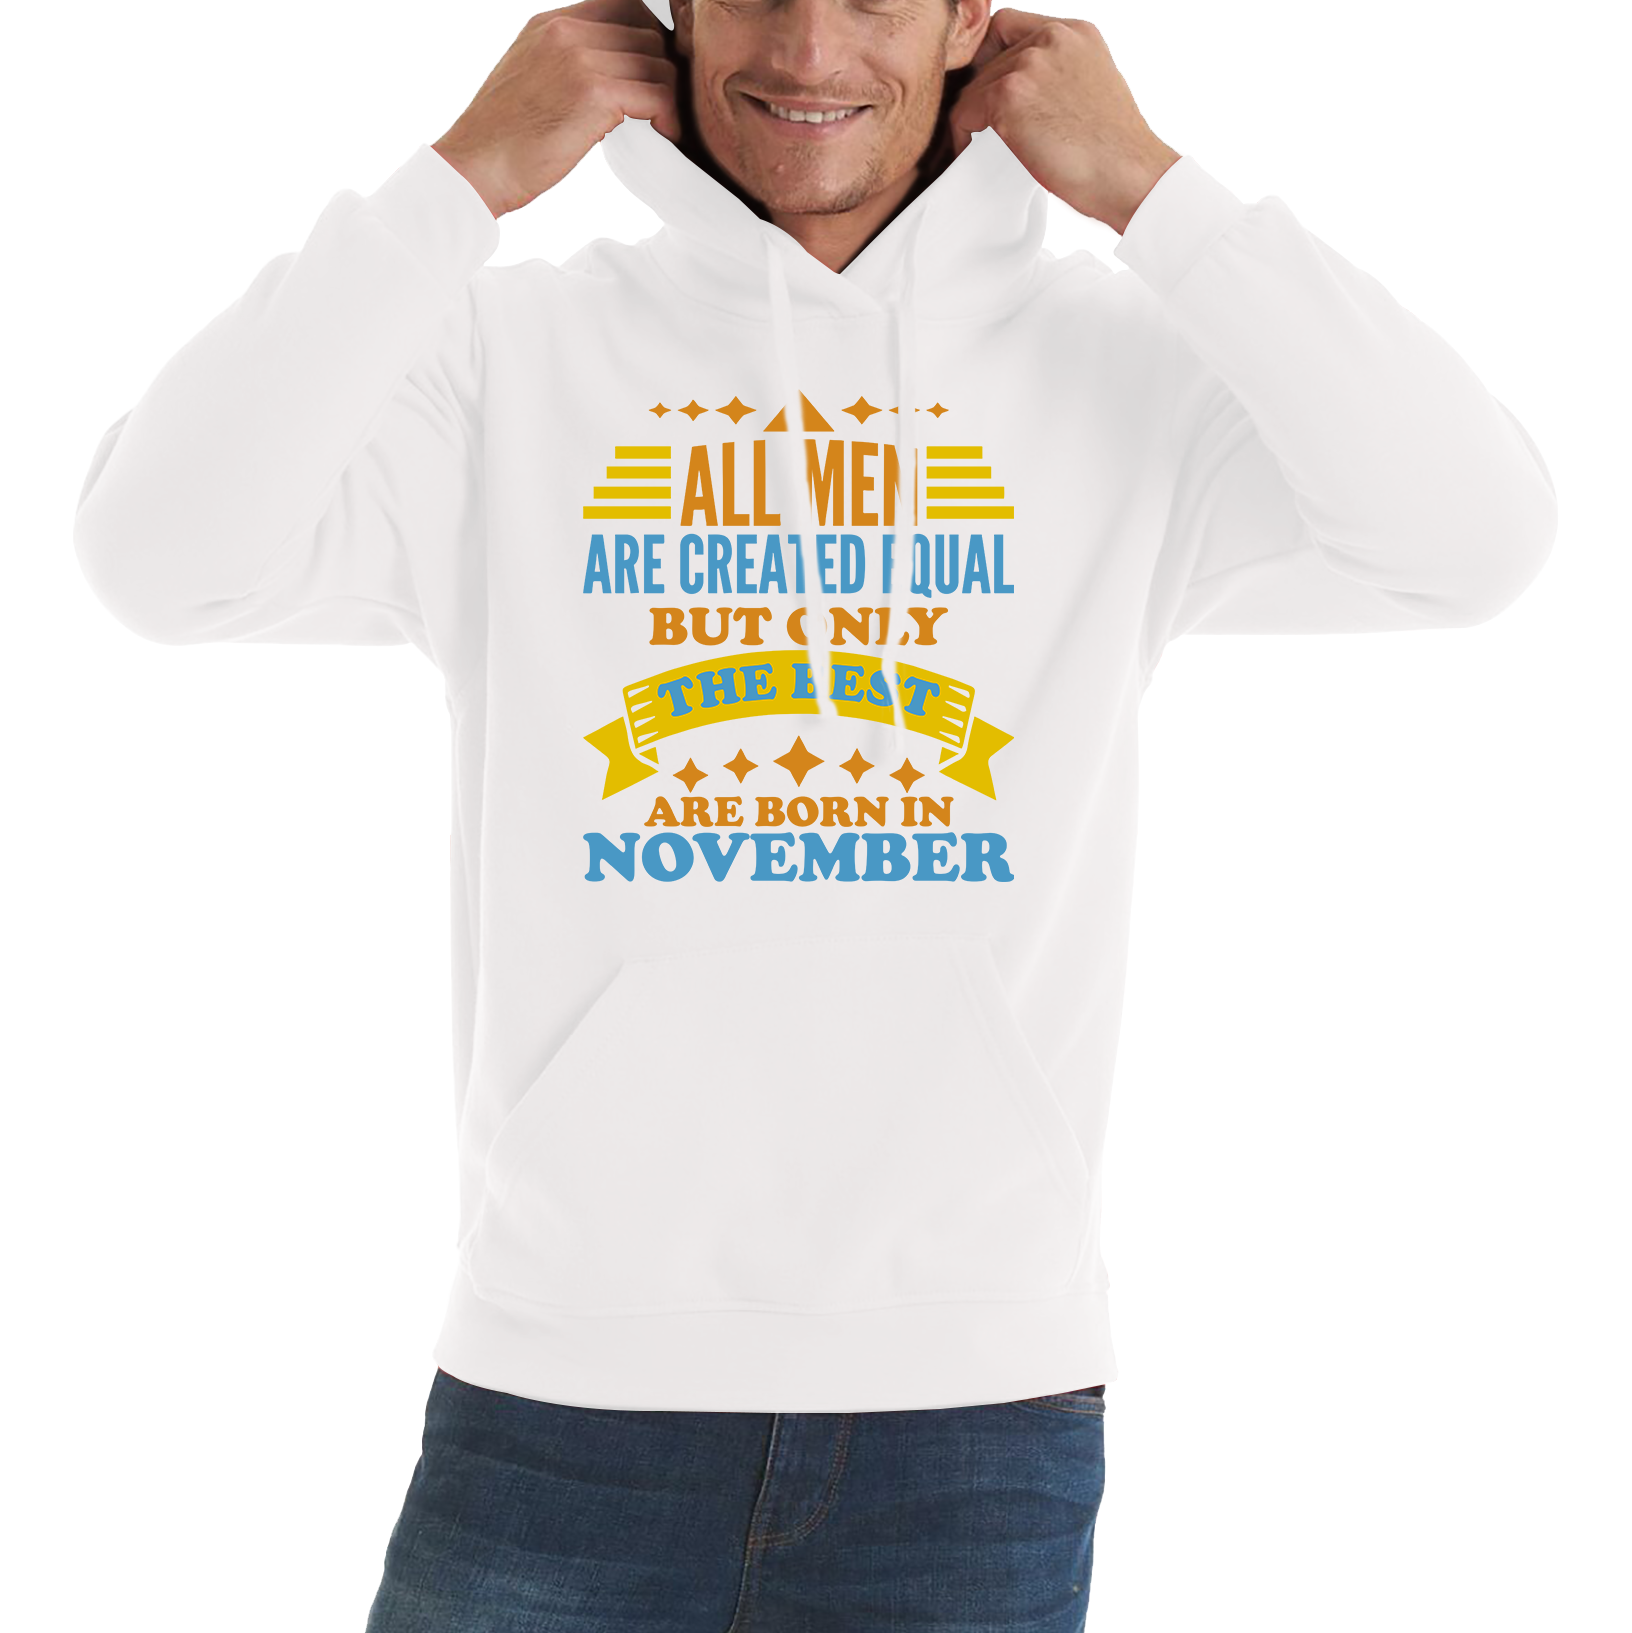 All Men Are Created Equal But Only The Best Are Born In November Funny Birthday Quote Unisex Hoodie